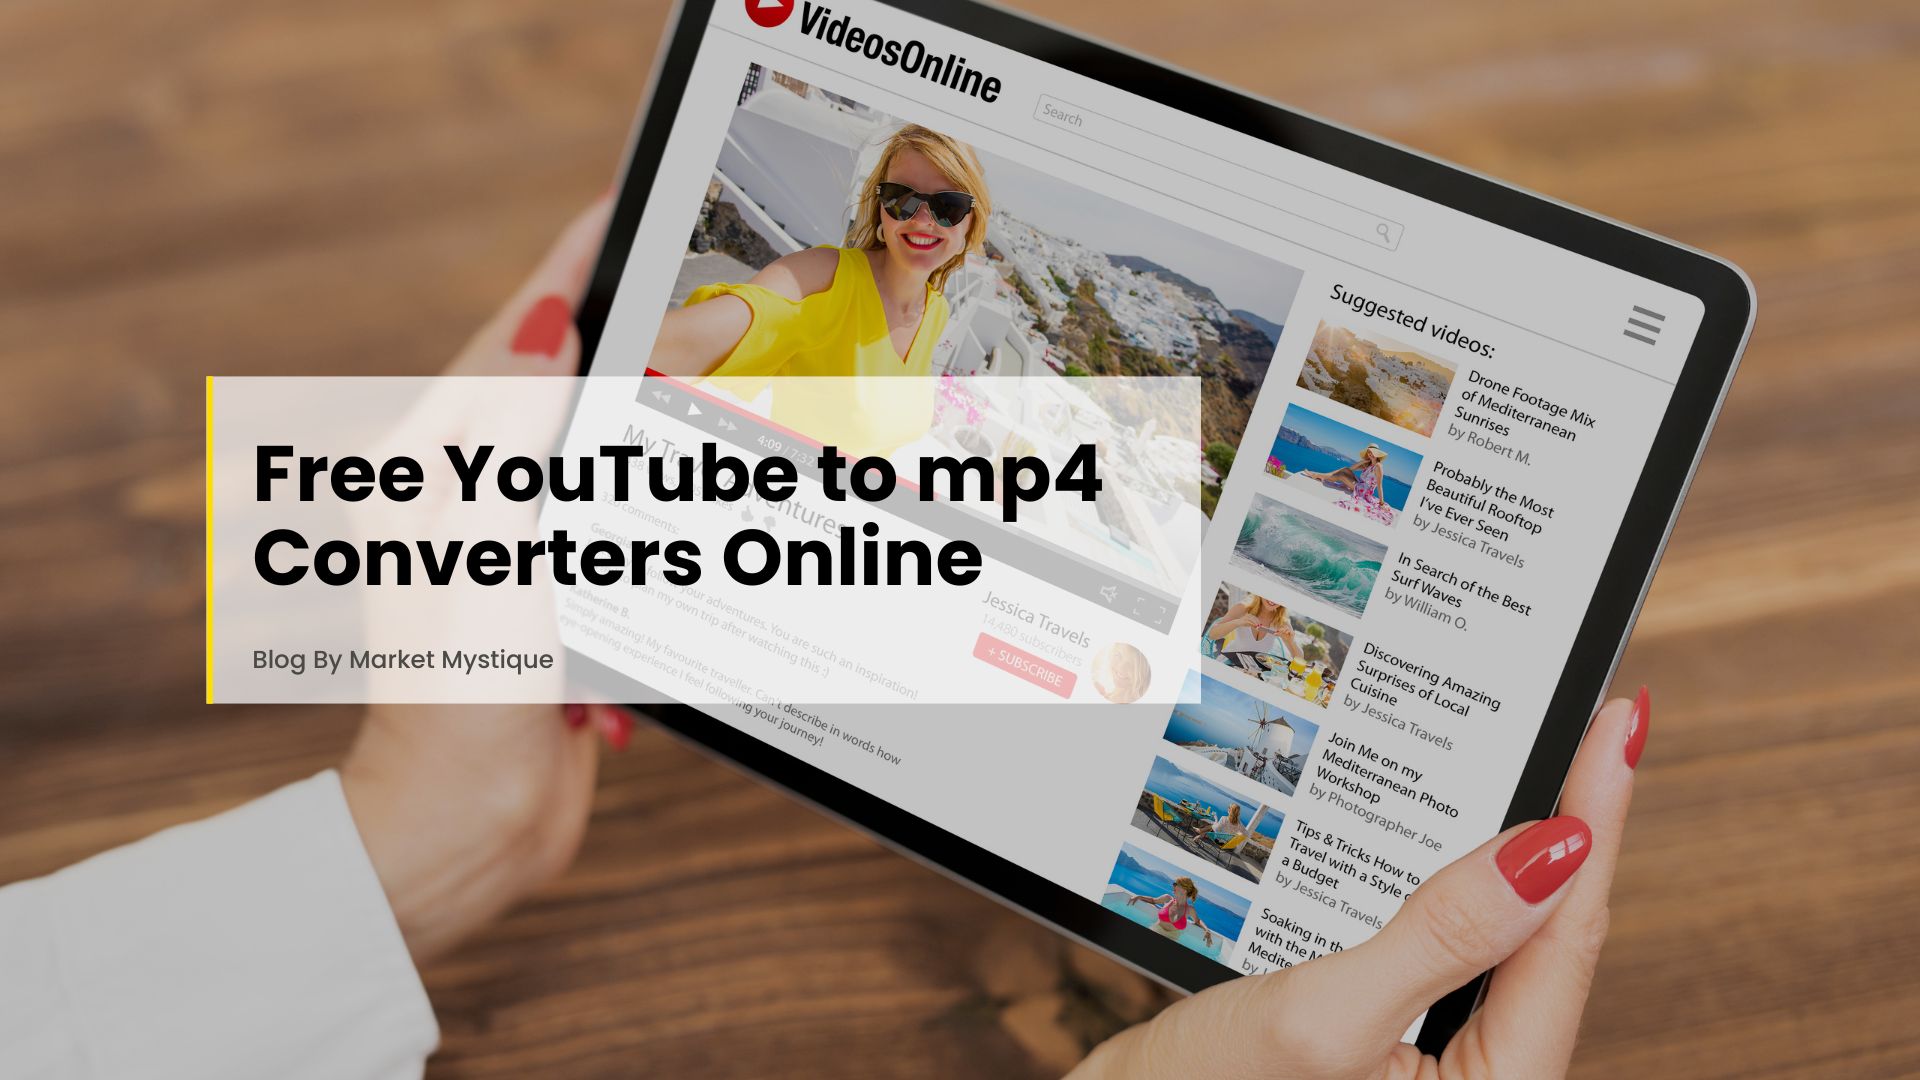 Free YouTube to mp4 Converters Online